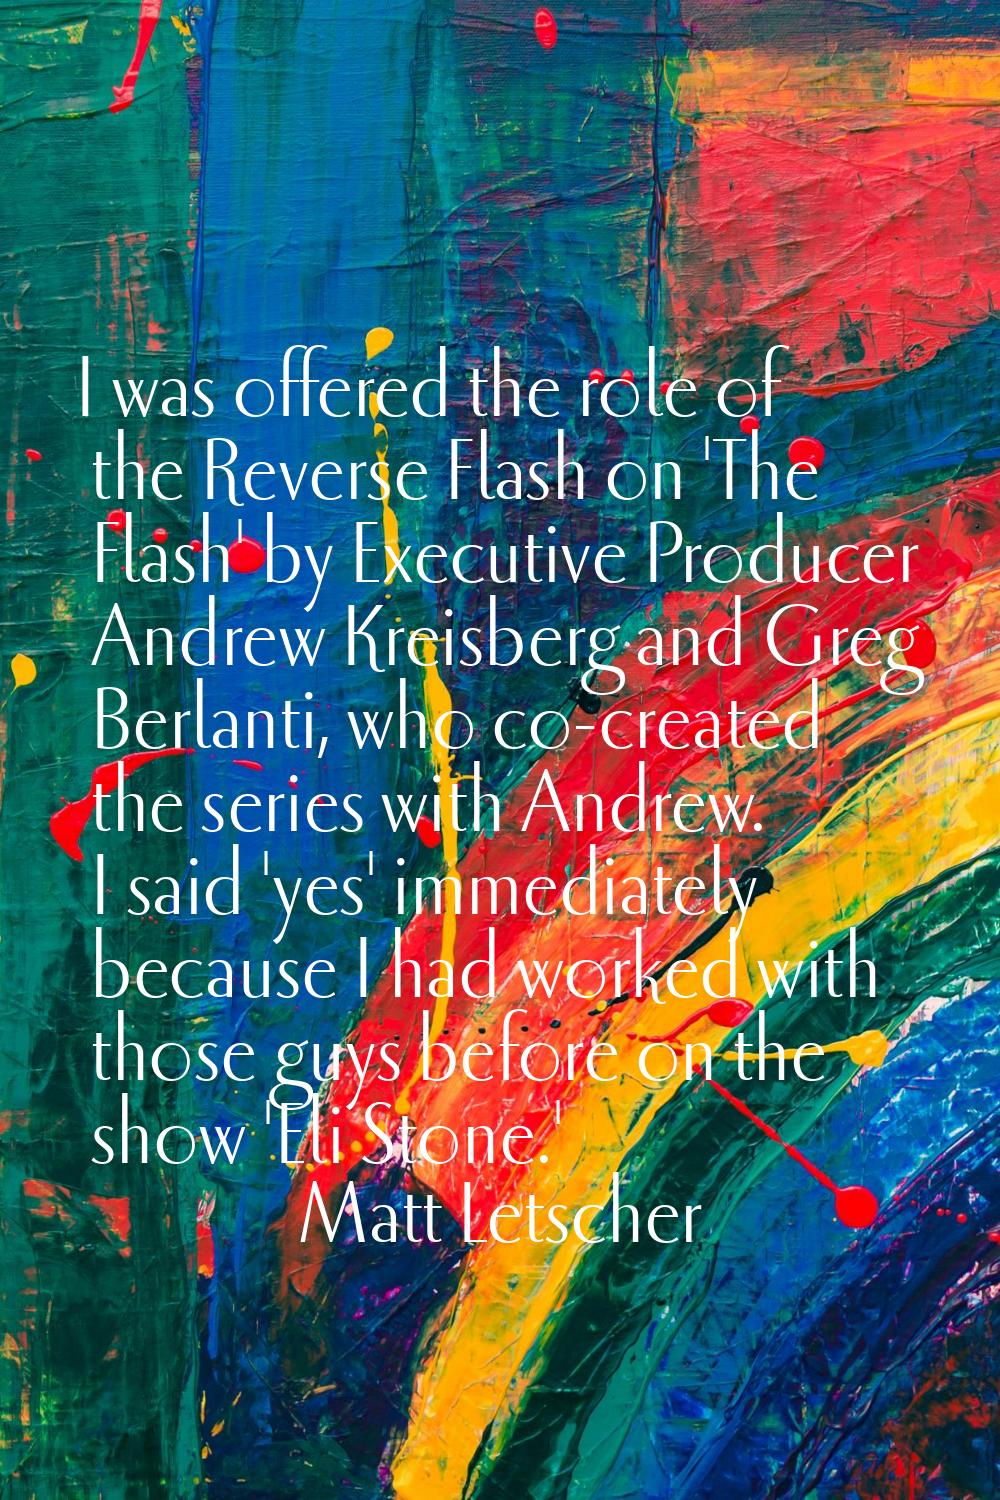 I was offered the role of the Reverse Flash on 'The Flash' by Executive Producer Andrew Kreisberg a